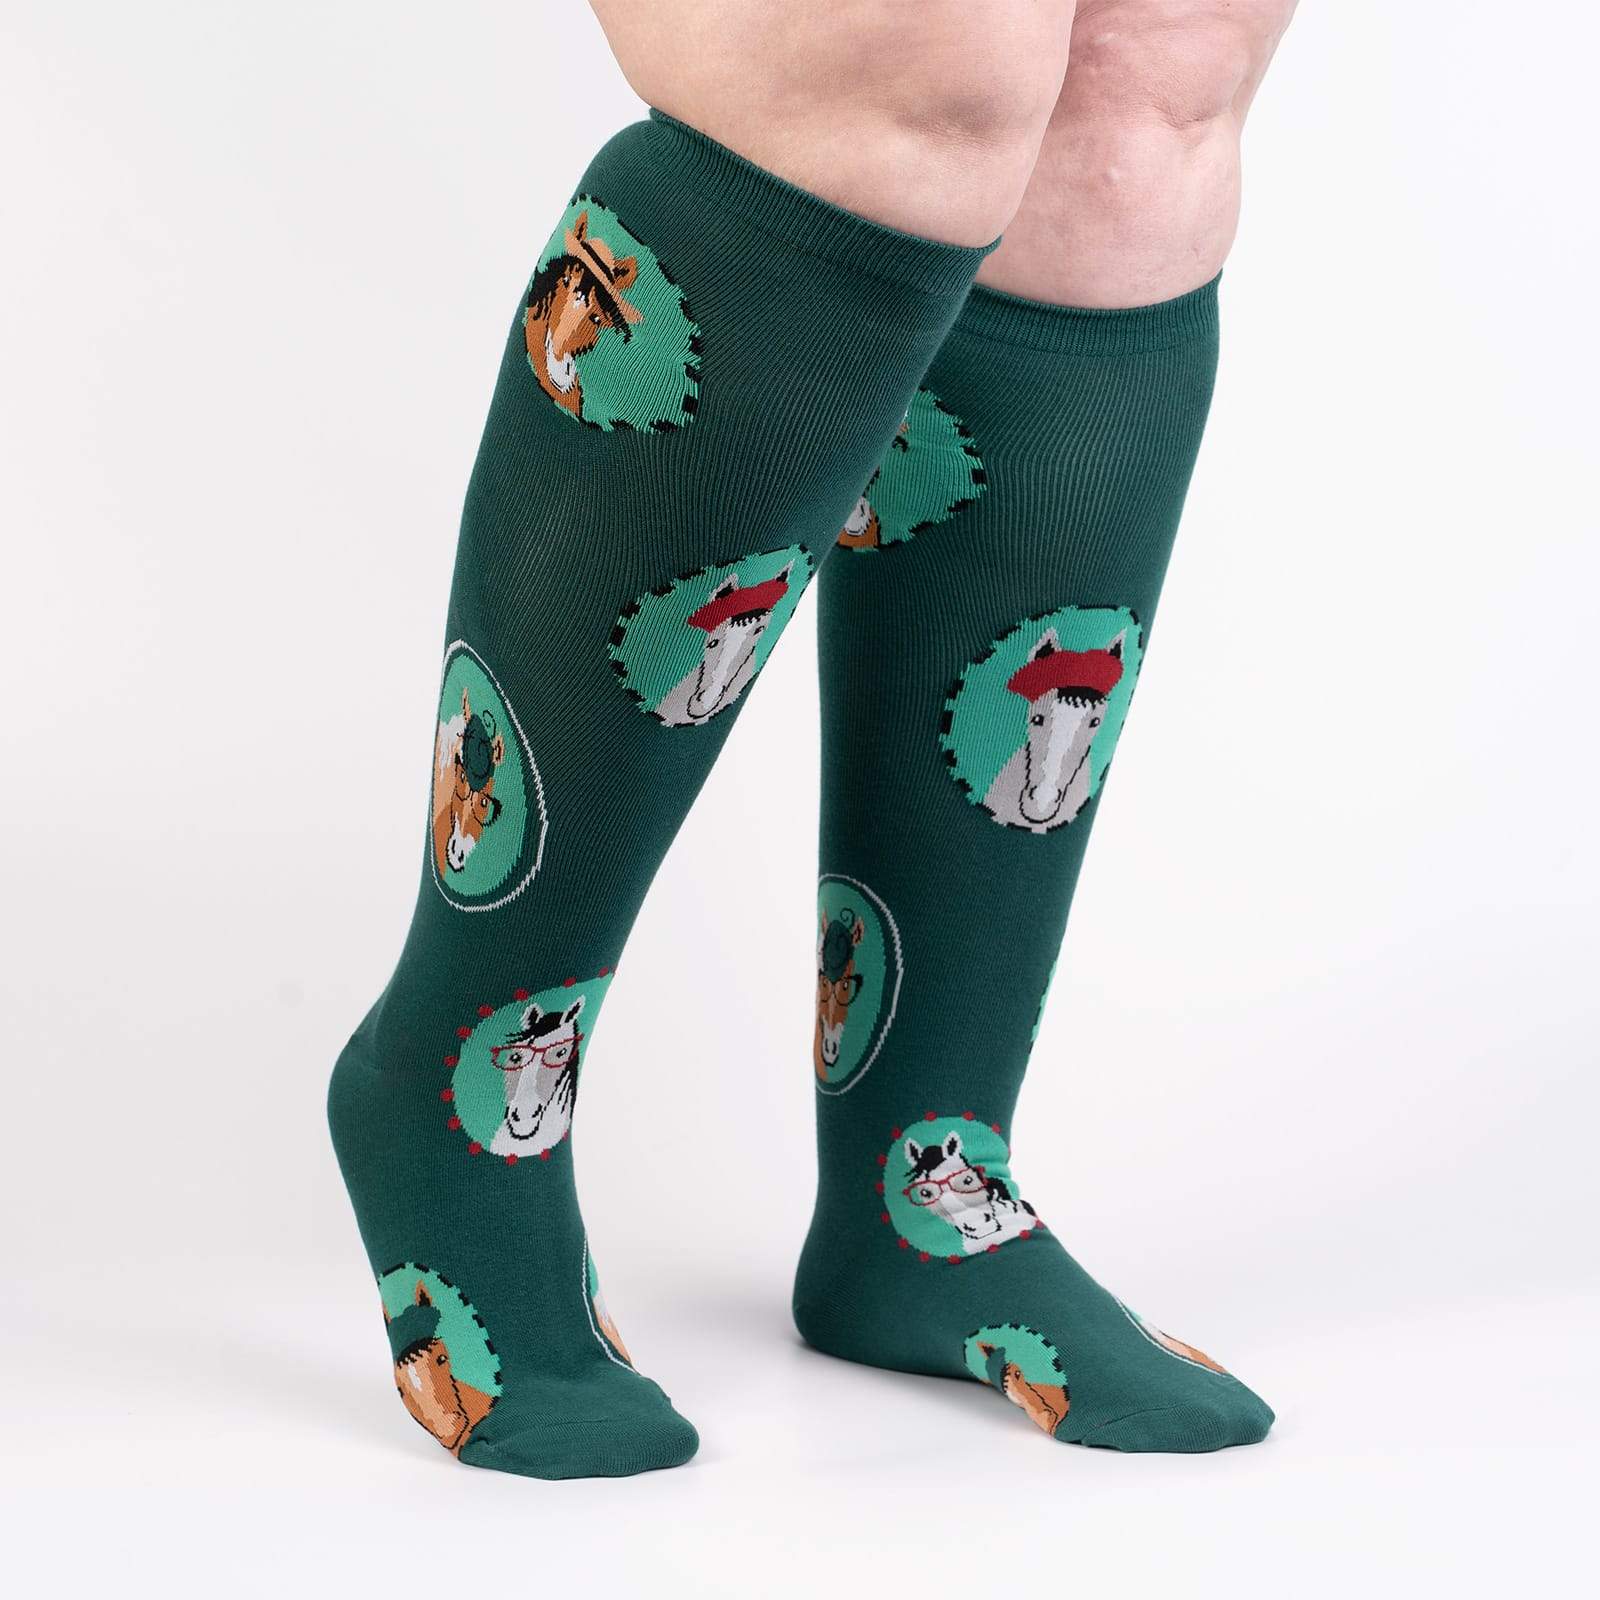 Sock It To Me Horsing Around extra-stretchy women's and men's knee high socks featuring teal socks with pictures of horses wearing hats and/or glasses. Socks shown on model from side. 